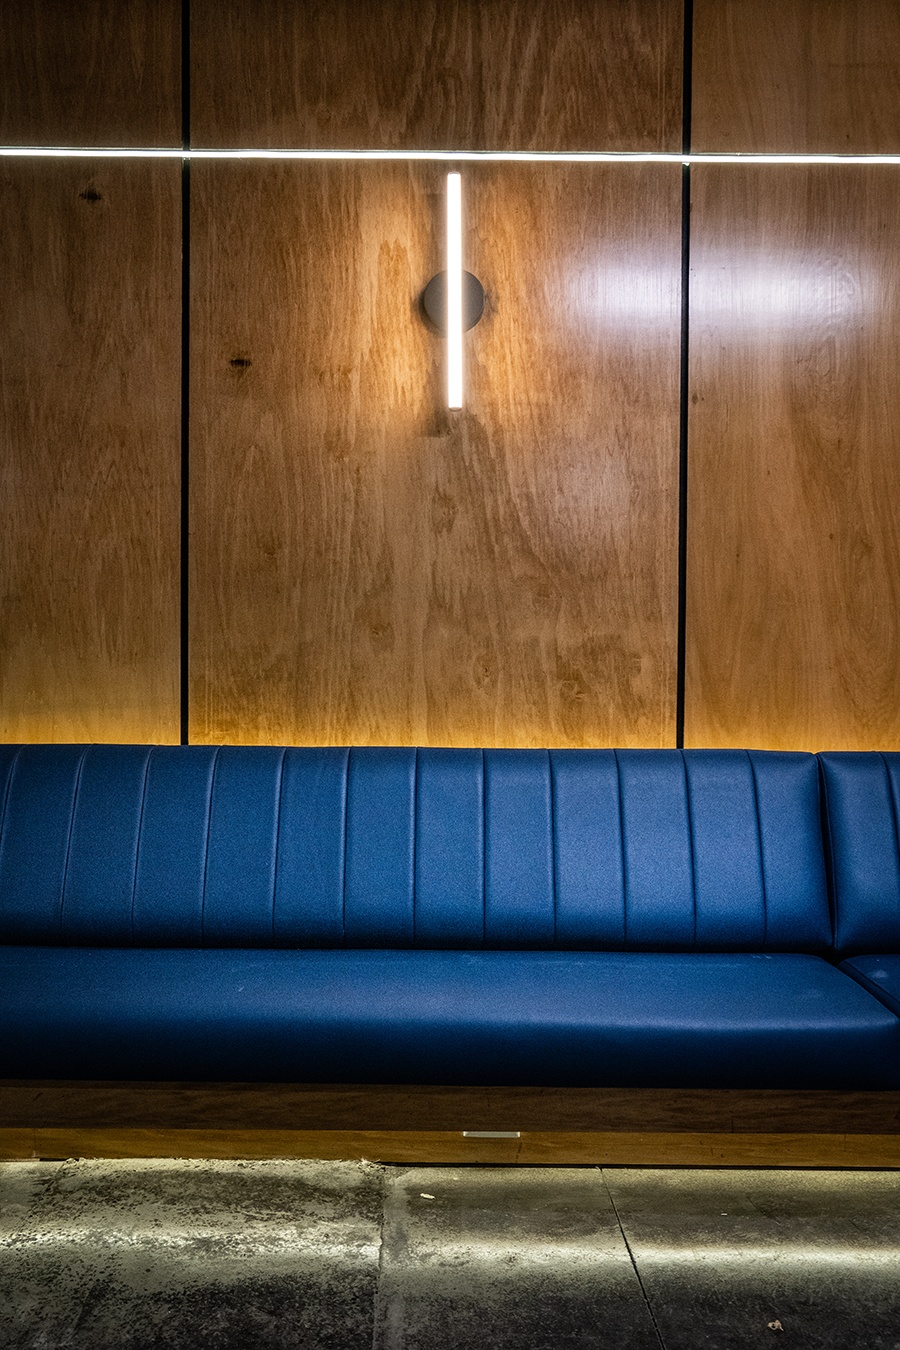 A blue banquette lines a wood-paneled wall.